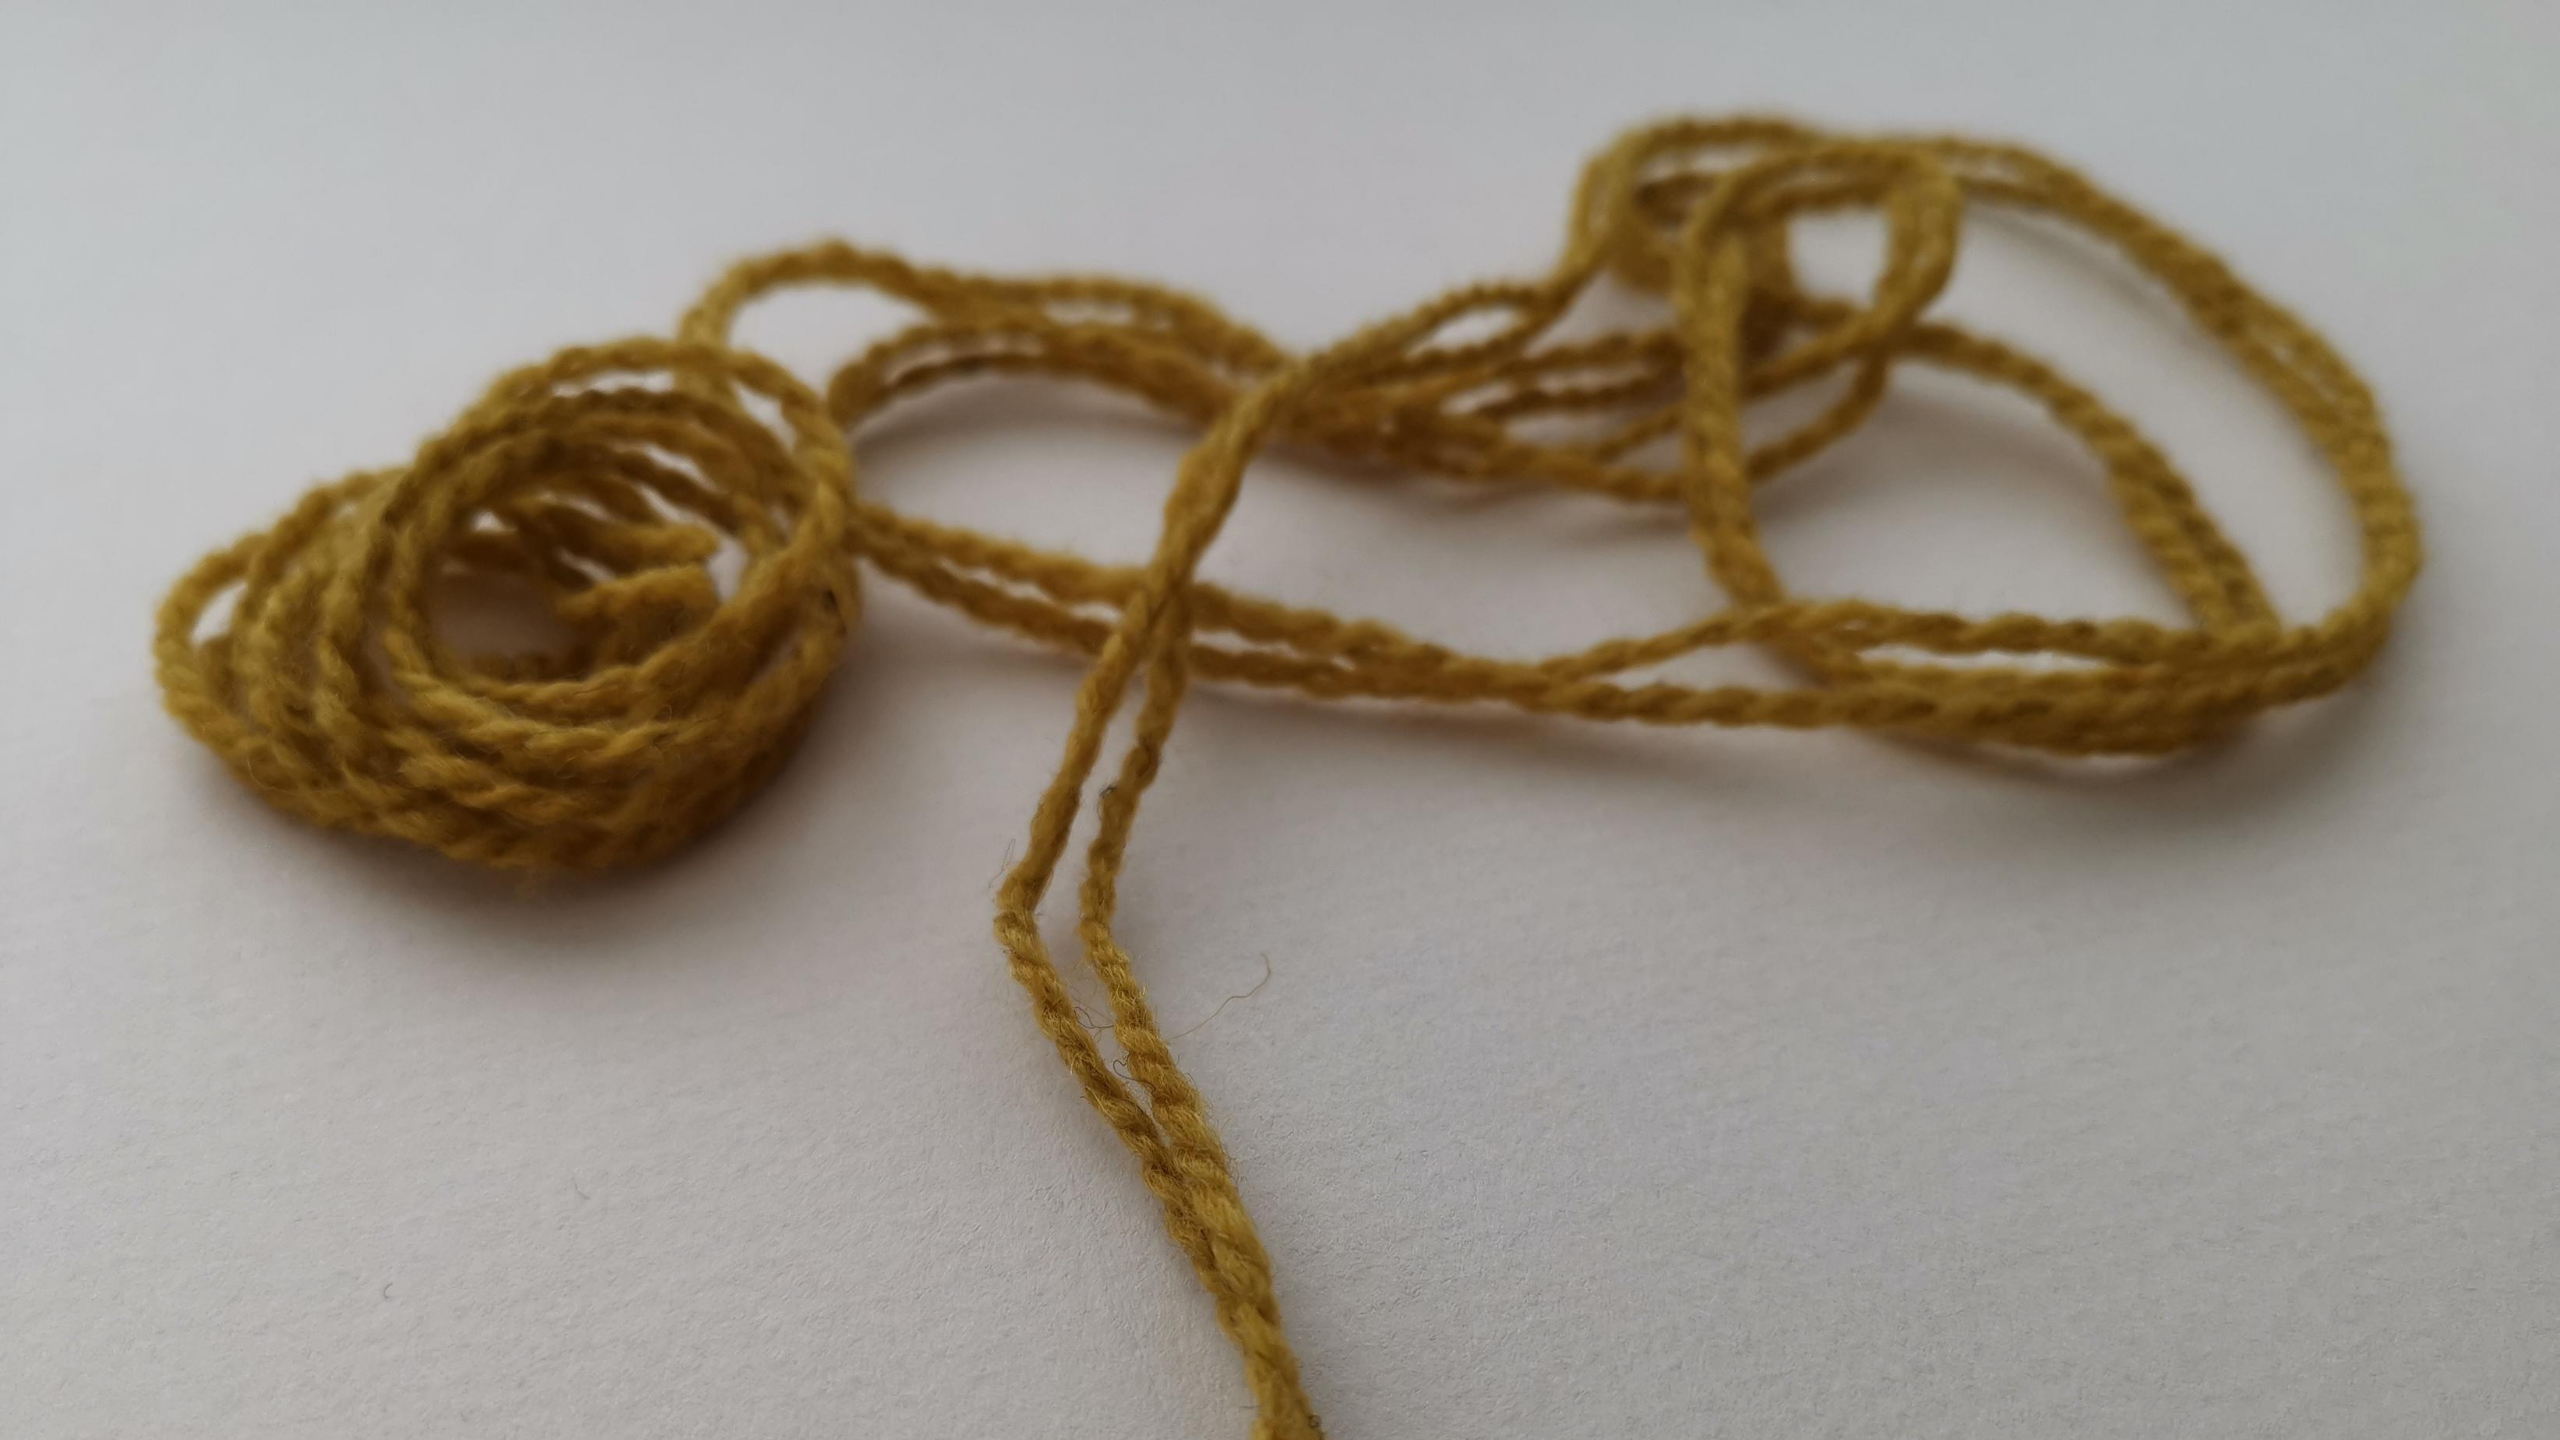 A yarn tangle of Blacker Yarns Cove in a mustard colour showing some fly away fibres and a medium twist.